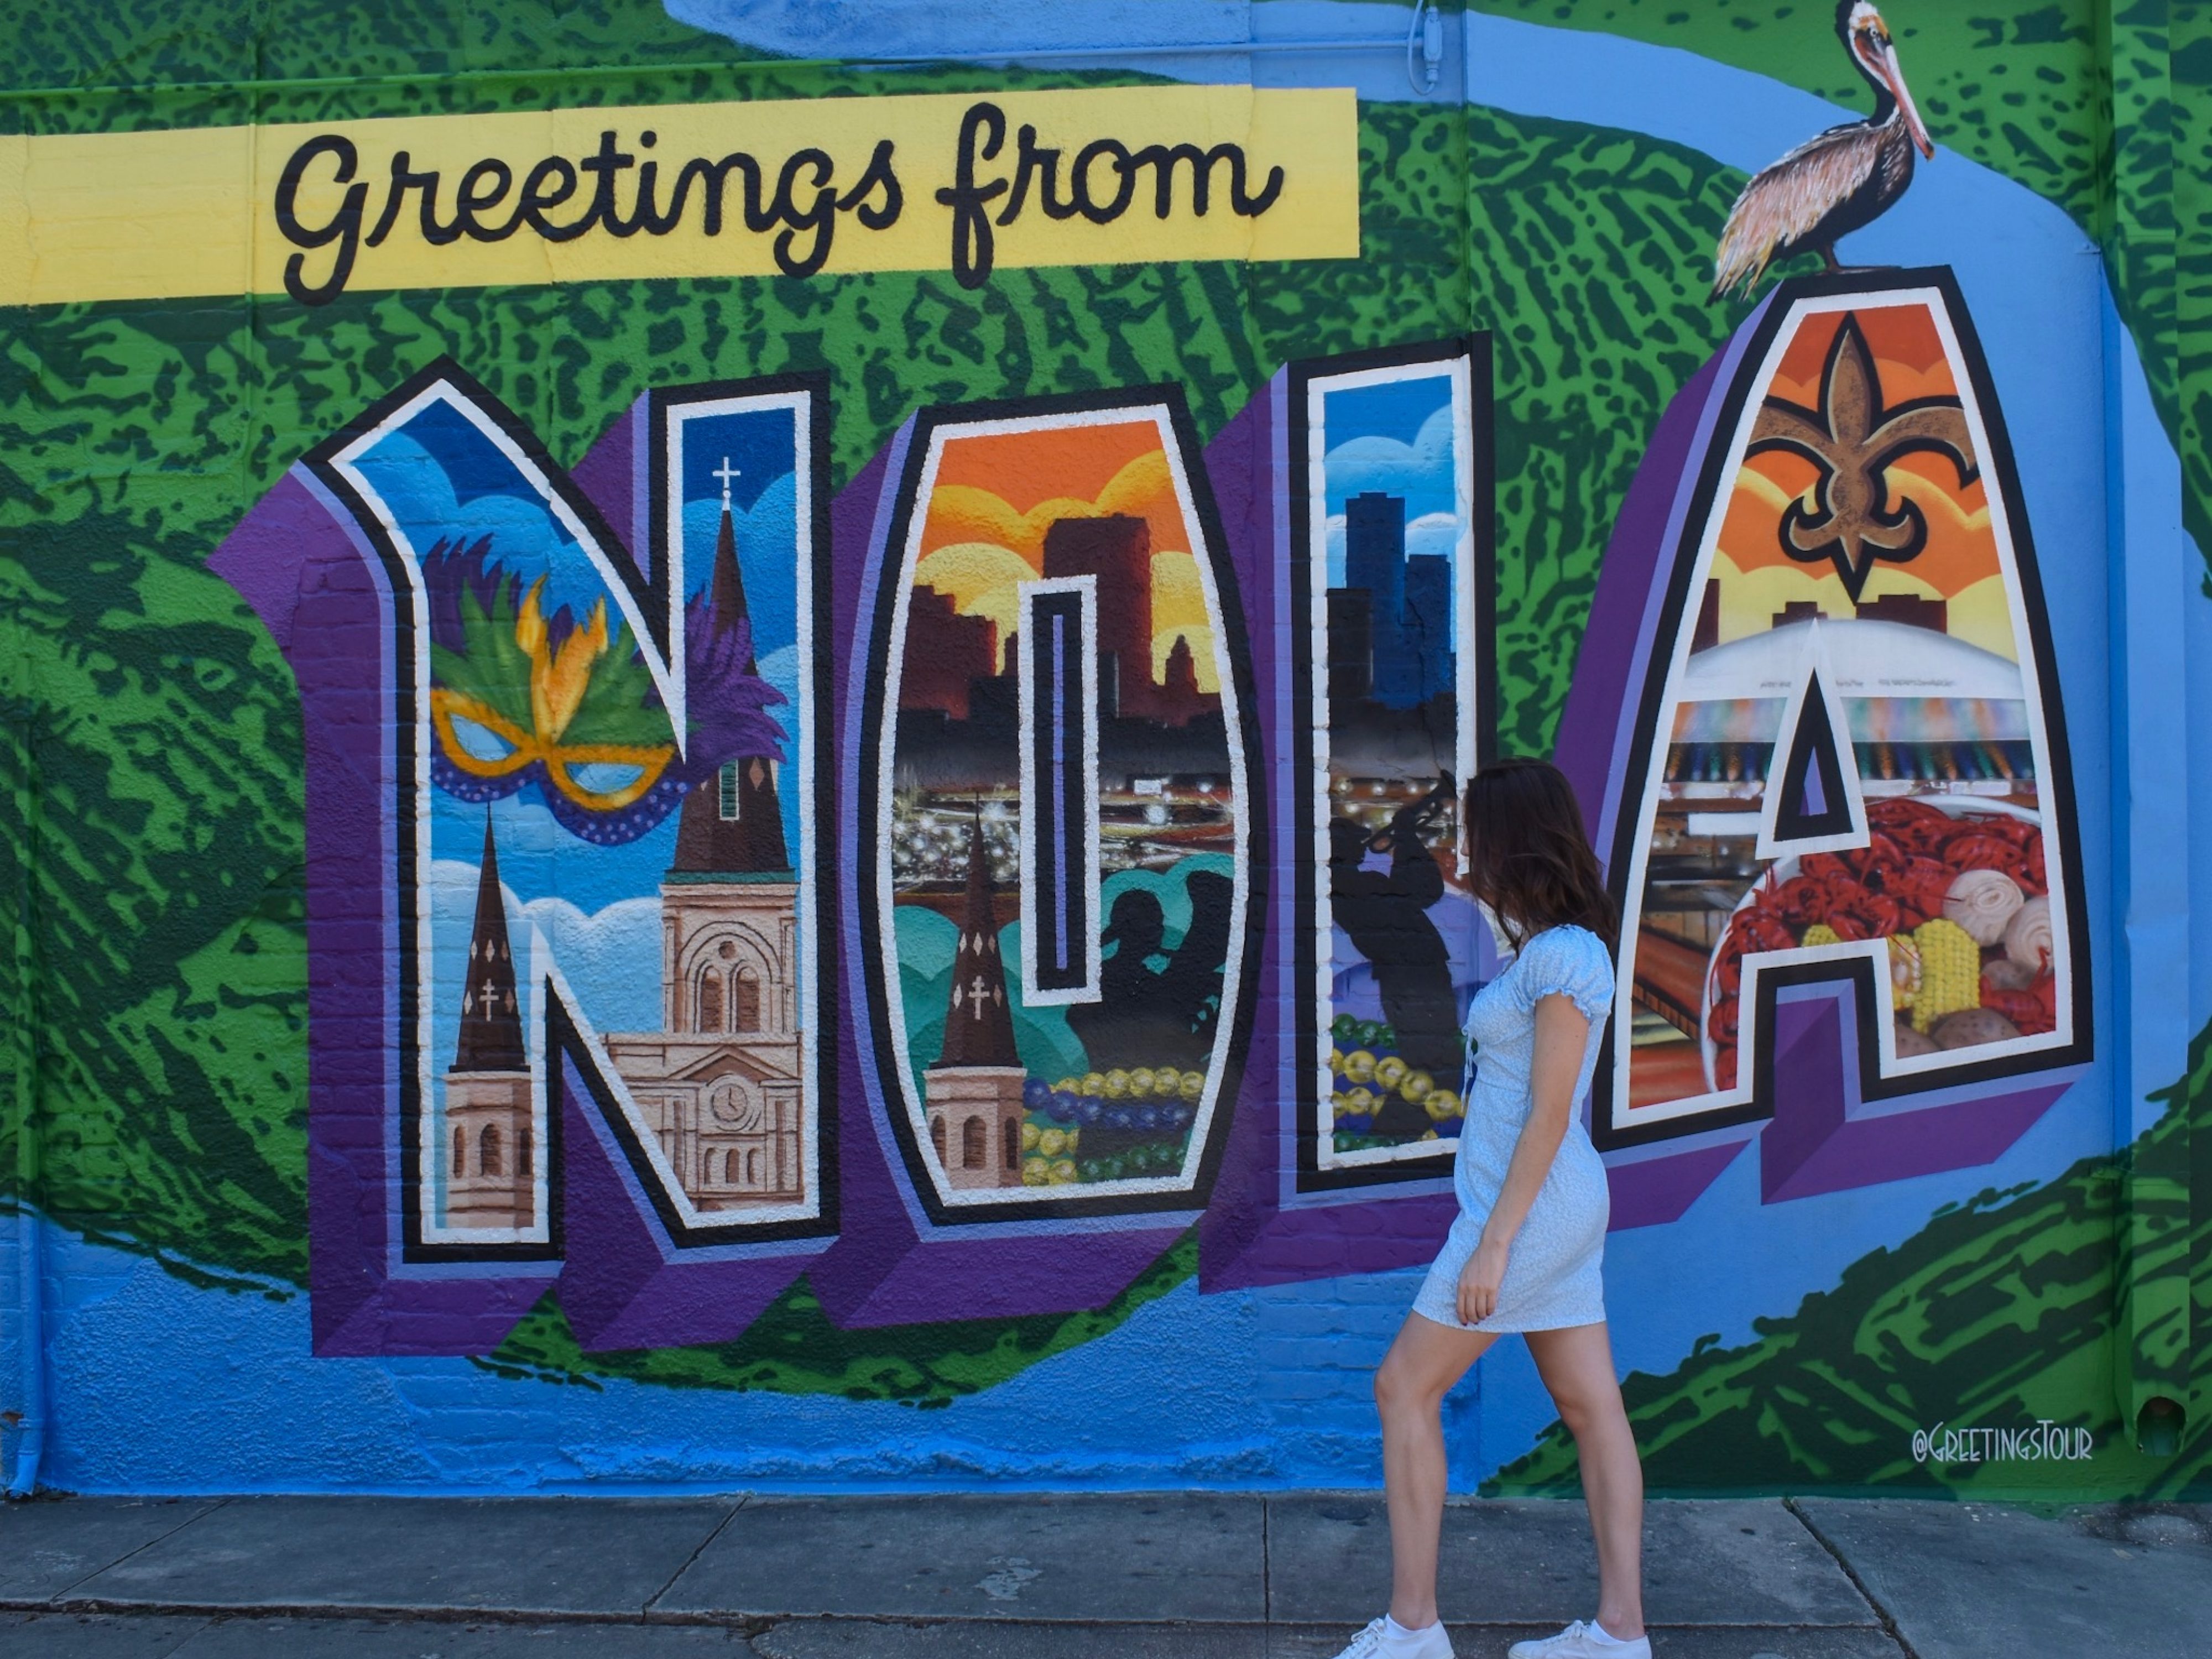 Where to find the Greetings from NOLA mural